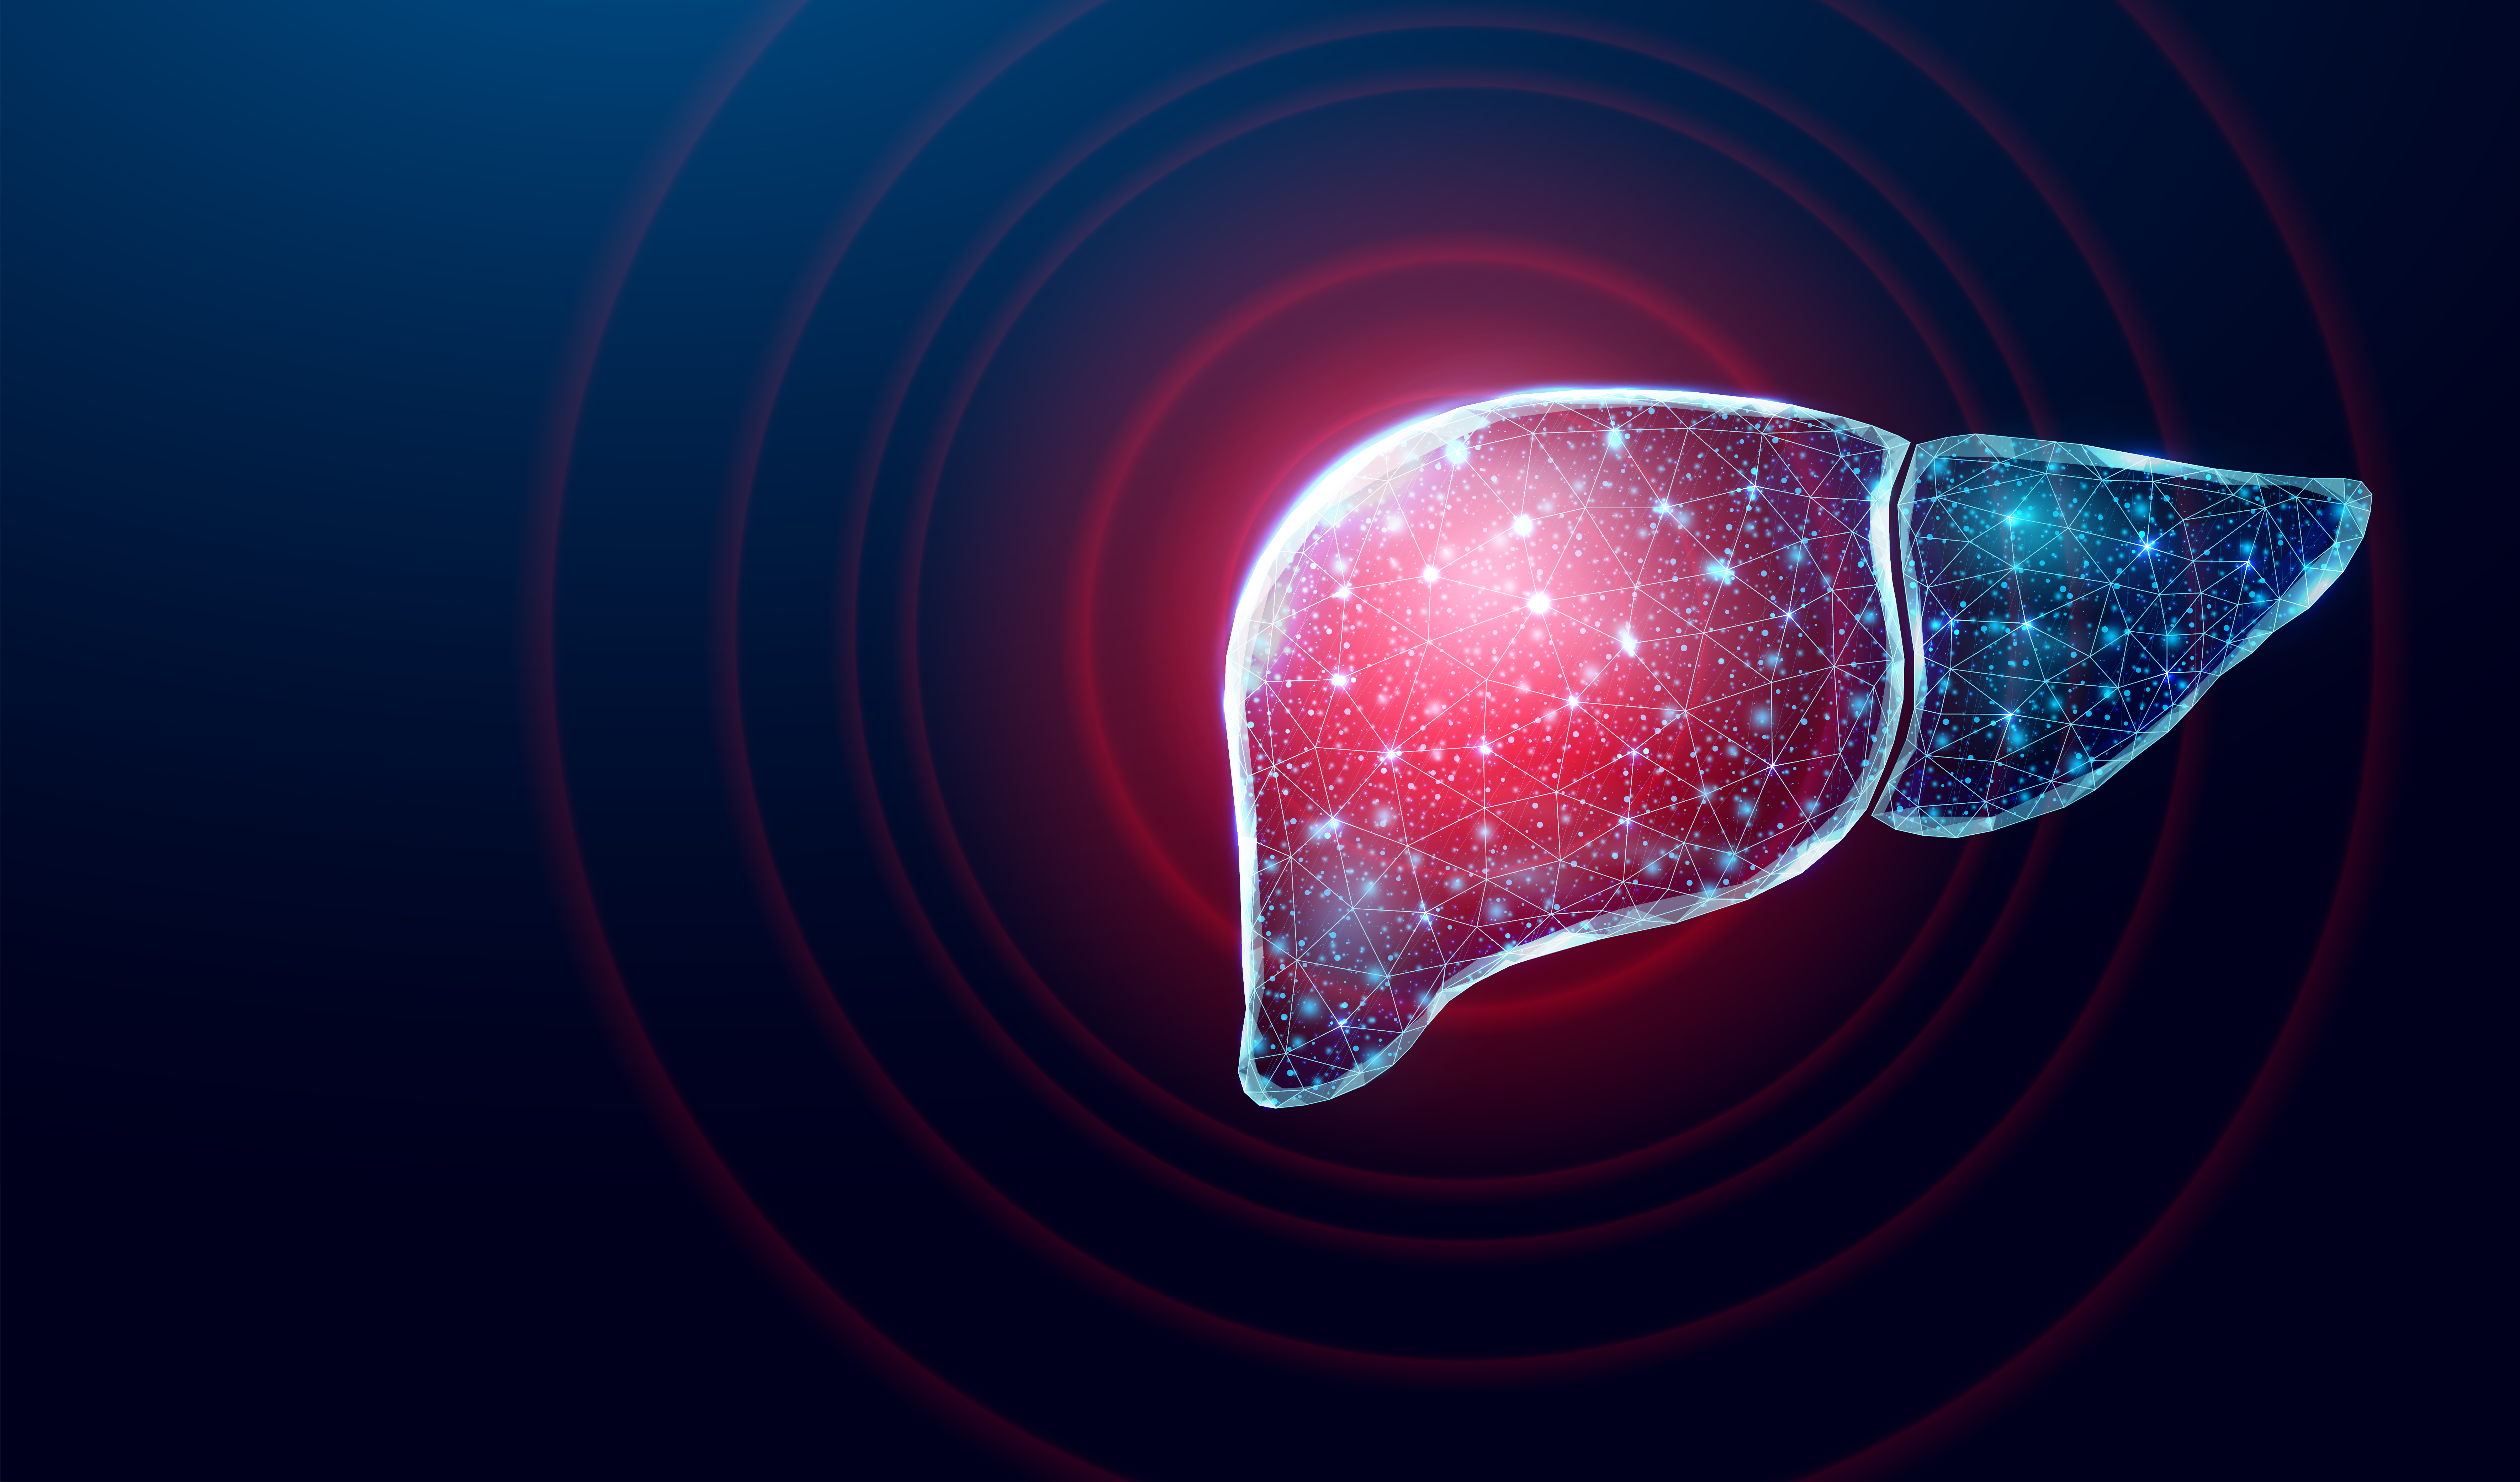 3D computer generated image of liver on blue background showing a network of connections in the liver